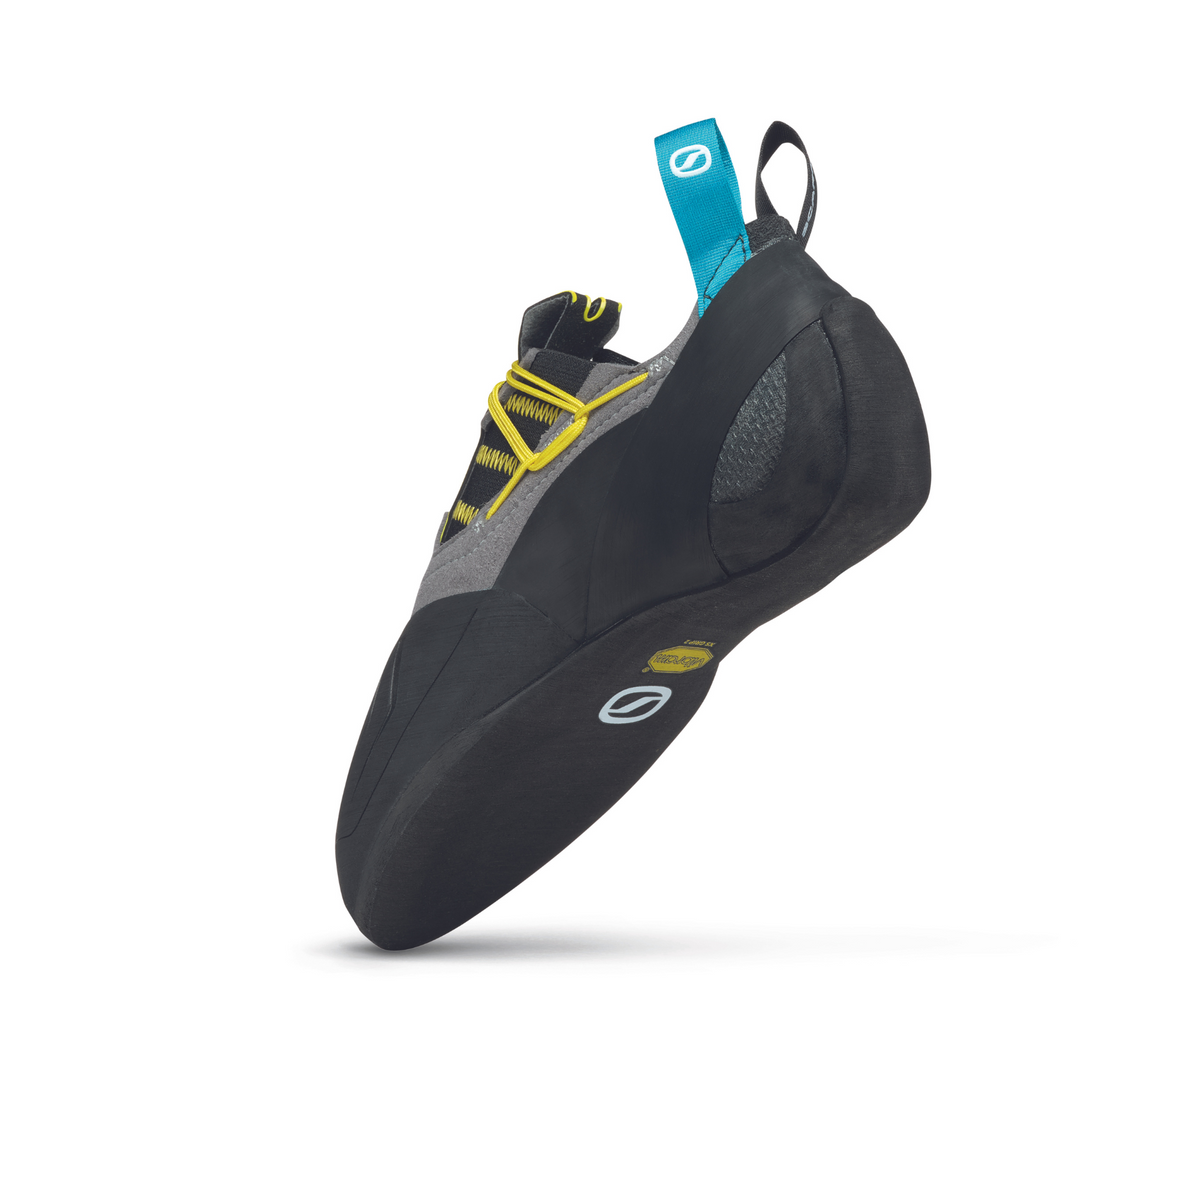 Scarpa Vapour S in smoke-grey with yellow trim. image showing sole unit with Vibram XS Grip2 rubber